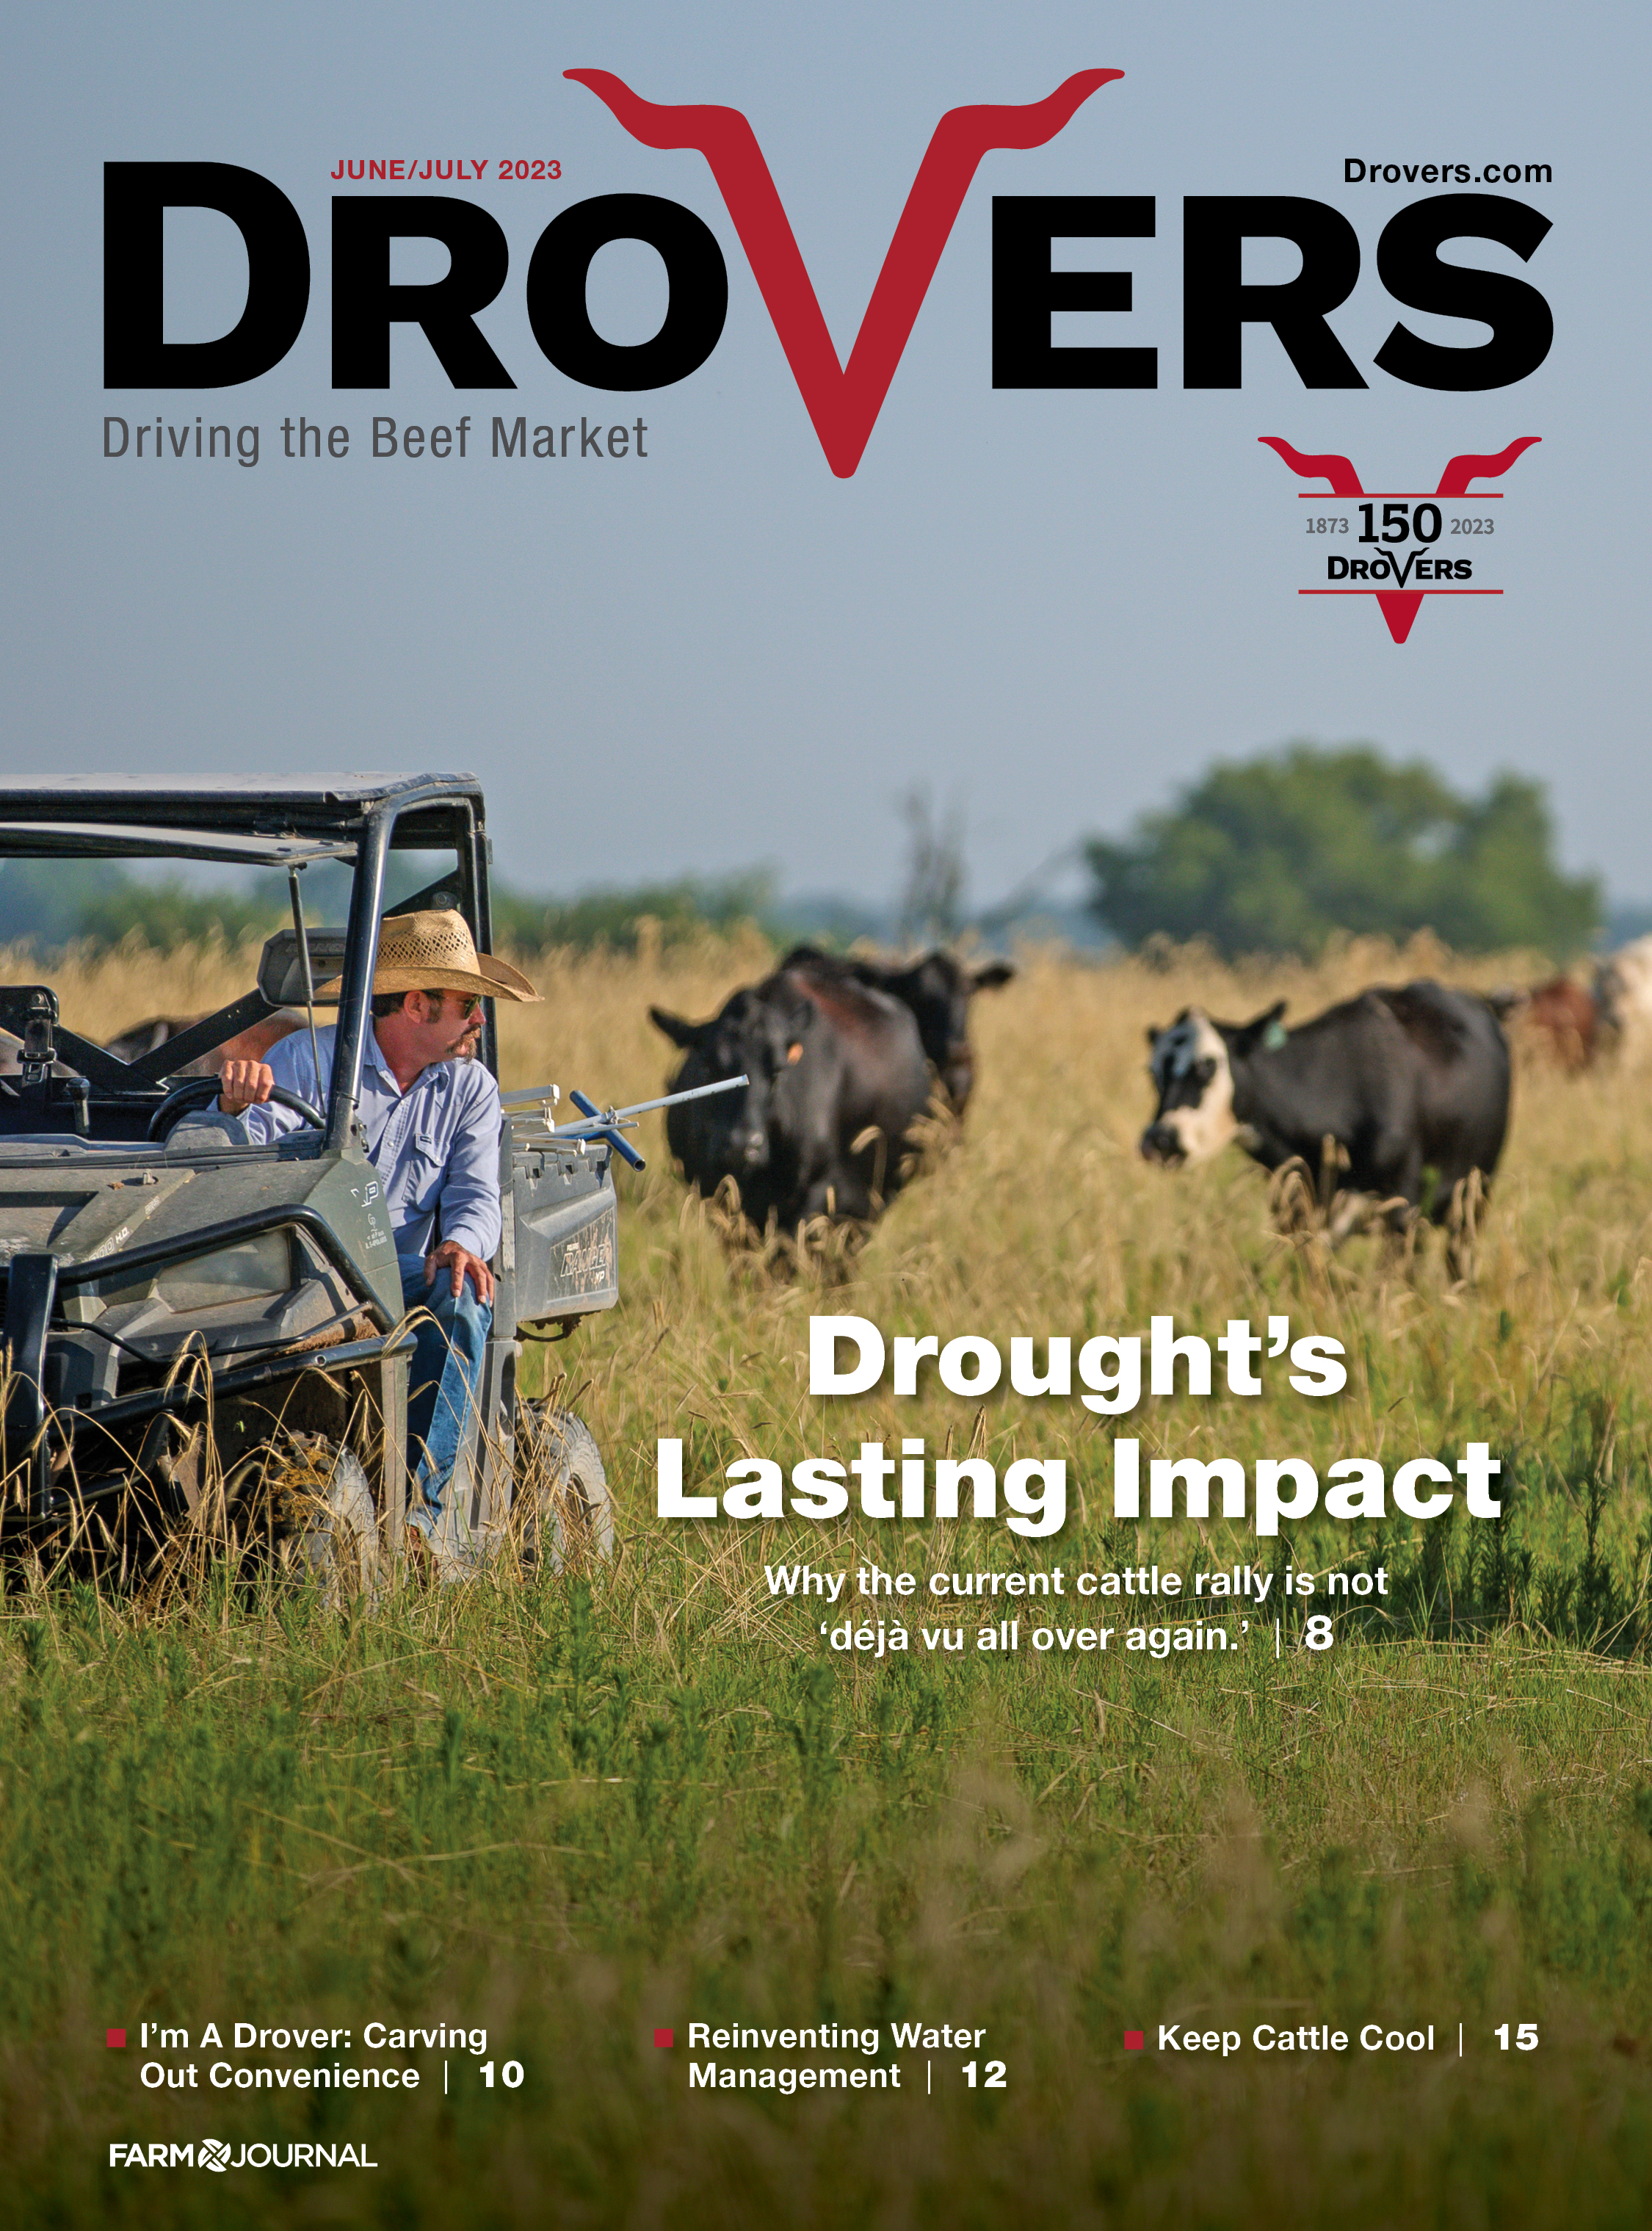  Drovers - June/July 2023 Cover 